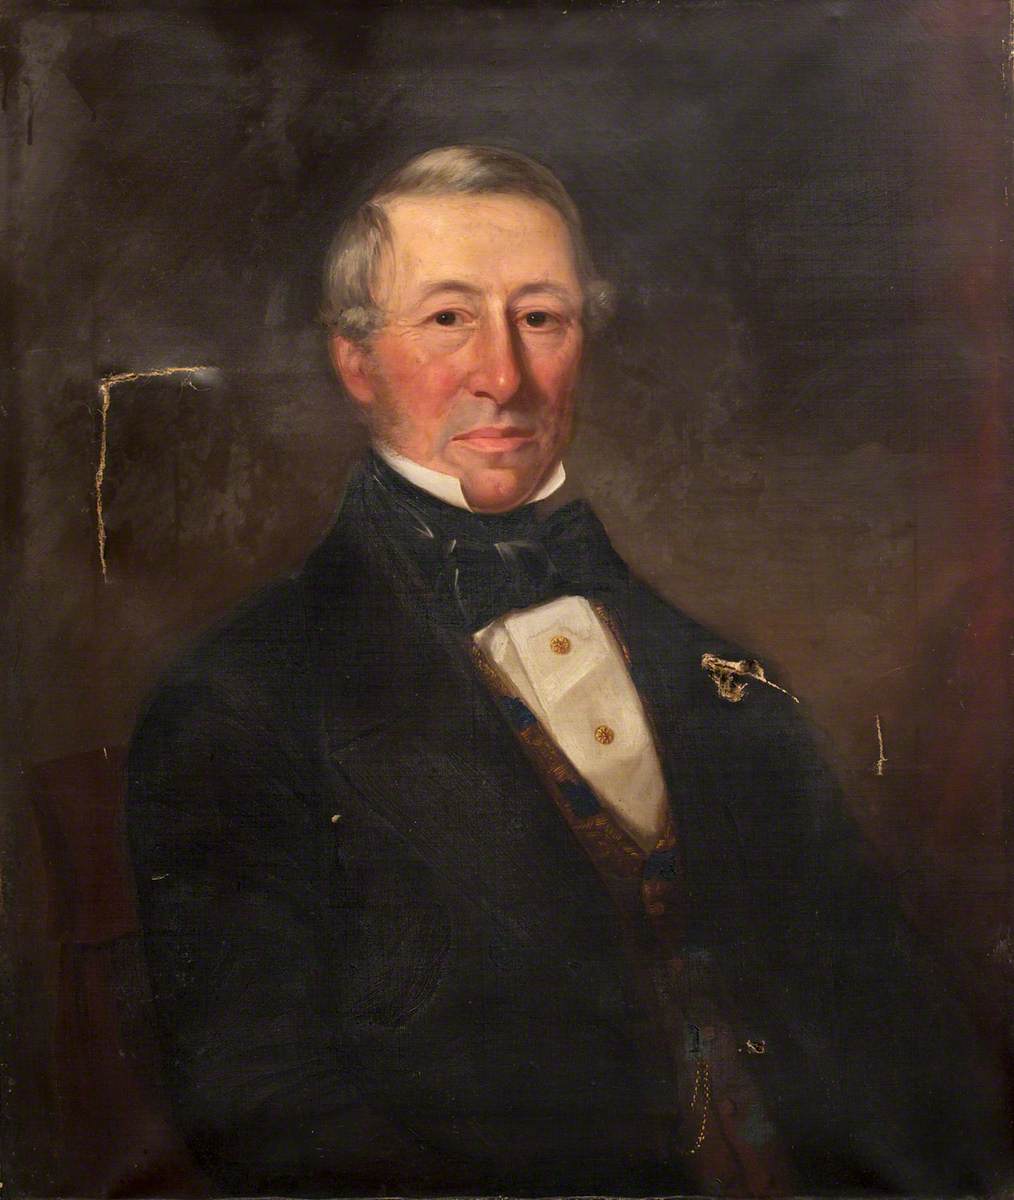 Portrait of an Unknown Gentleman with a Checked Waistcoat